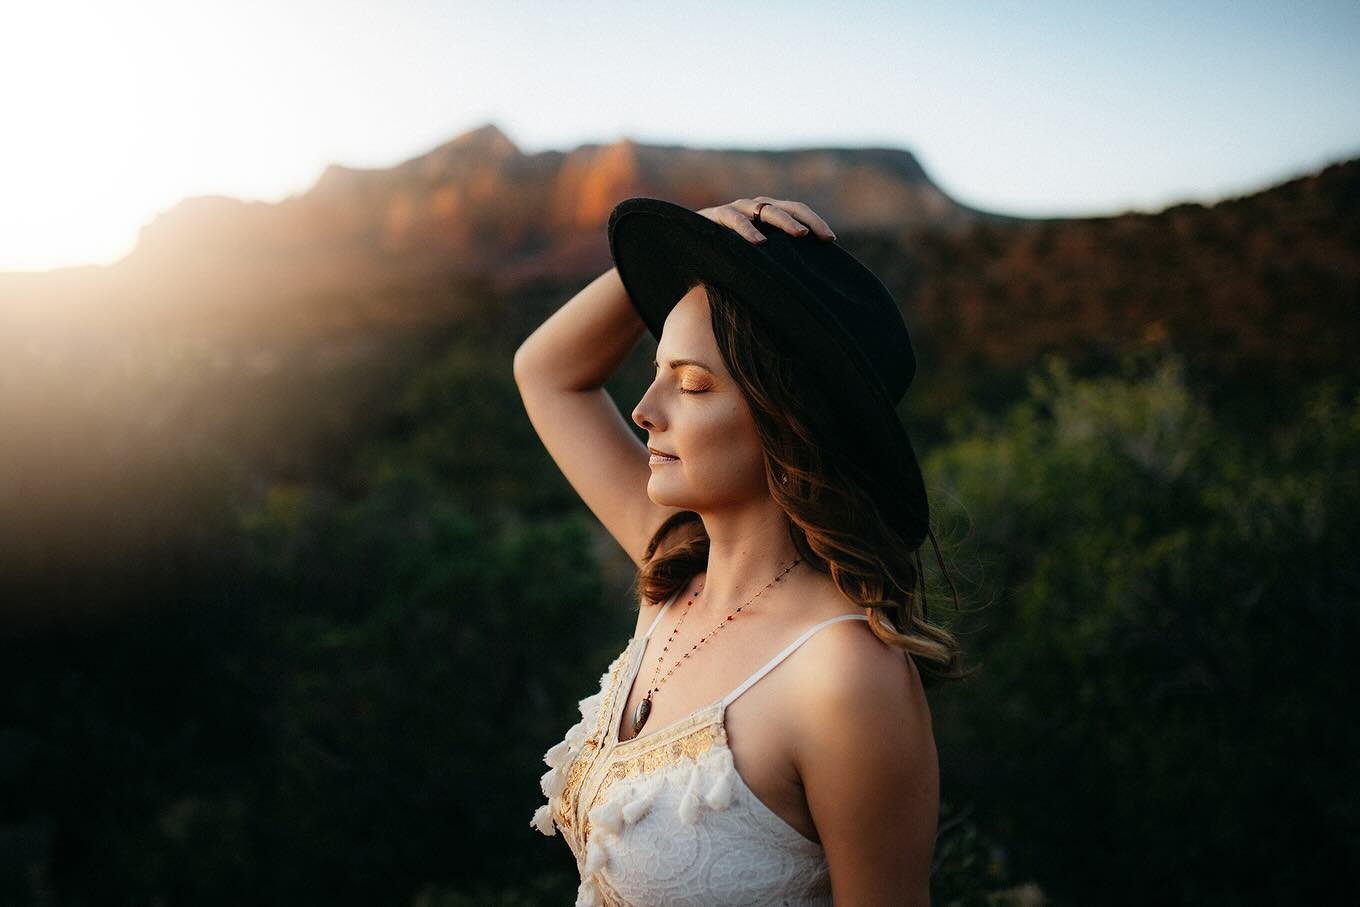 ✨Sedona Women✨
I&rsquo;ve learned so much about Sedona and still have so so much to learn. My time here is coming to an end in 2 weeks. Not an end, but a beginning. I will be back! 
Thank you to all of the beautiful women here who taught me so much. 